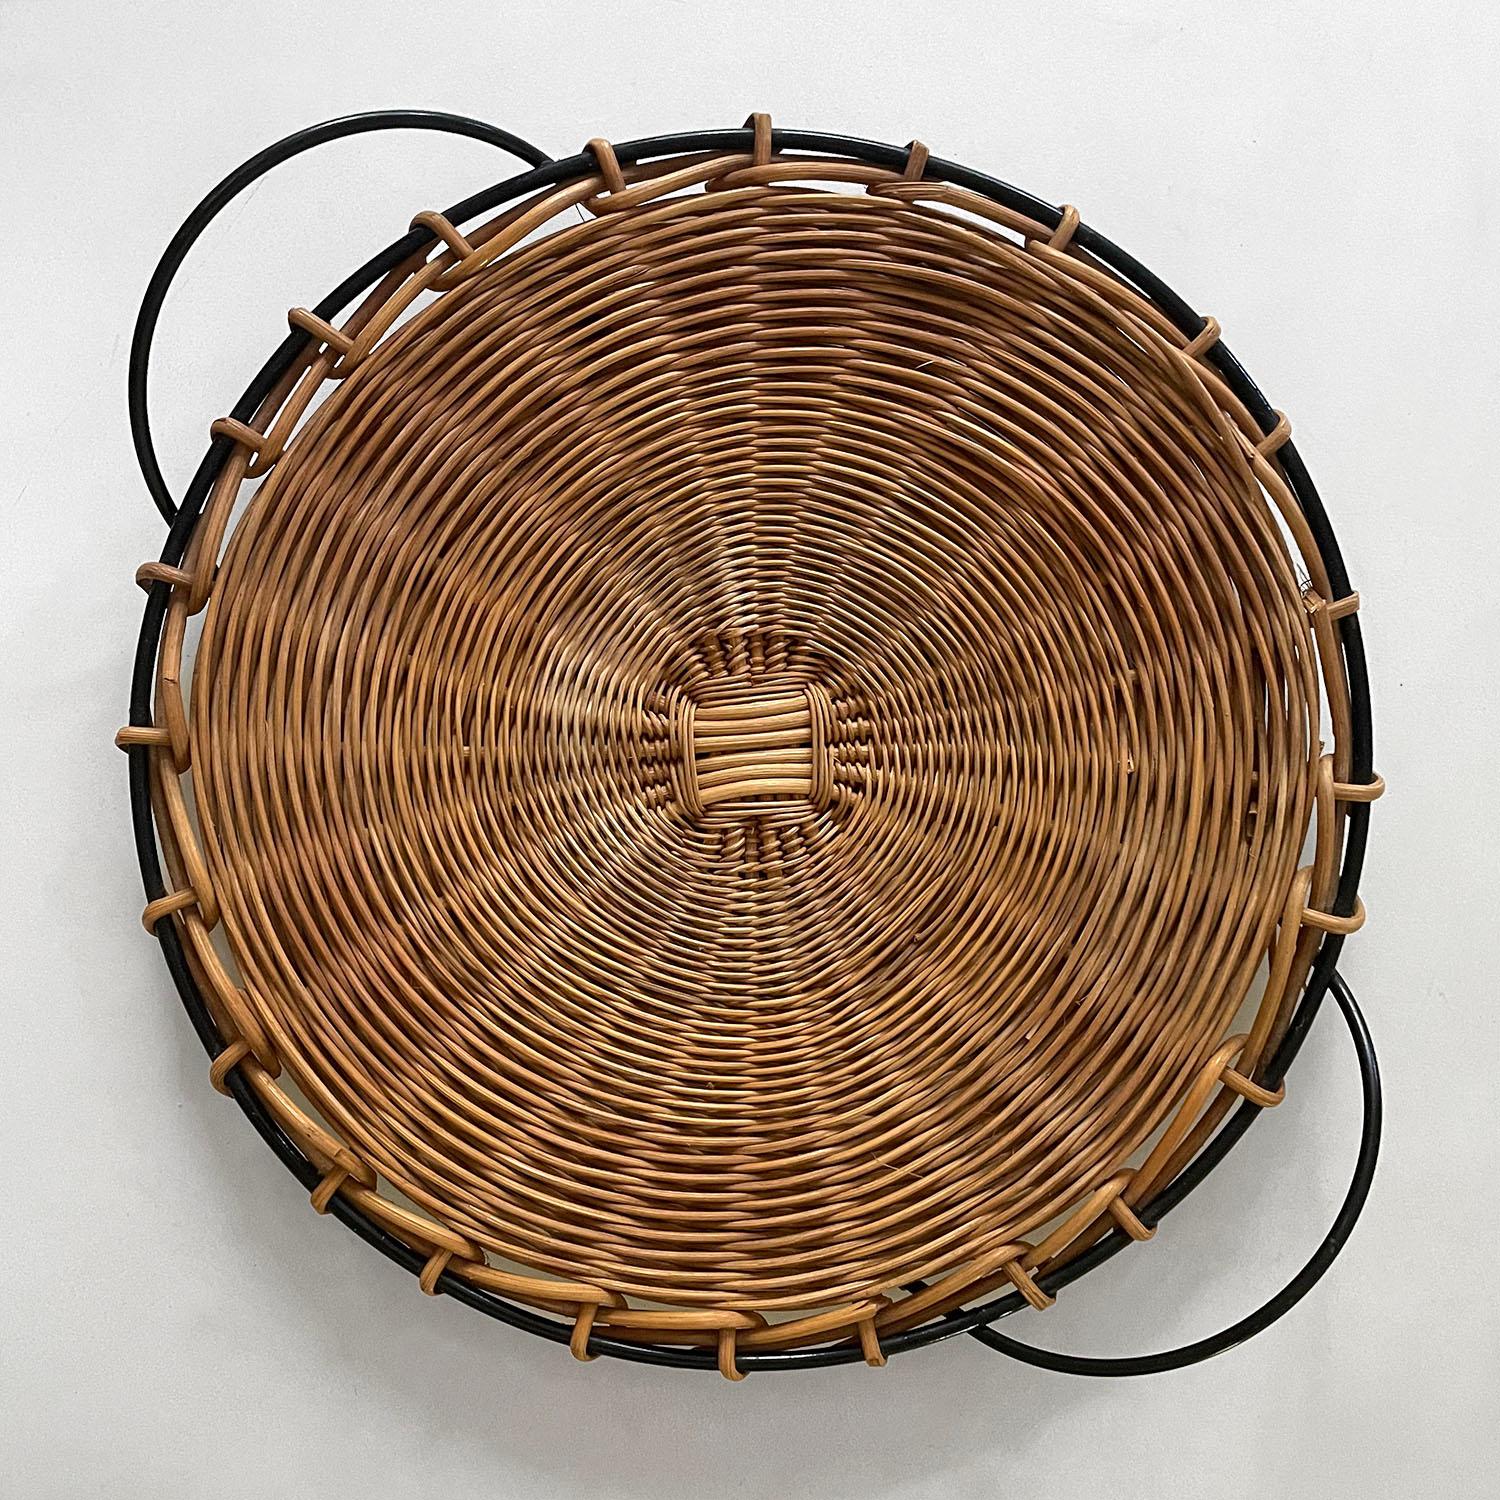 French wicker & iron tray in the style of Raoul Guys 
France, circa 1950’s
Hand woven wicker tray with beautiful attention to detail
Minor imperfections and wicker loss 
Patina from age and use
Perfectly imperfect